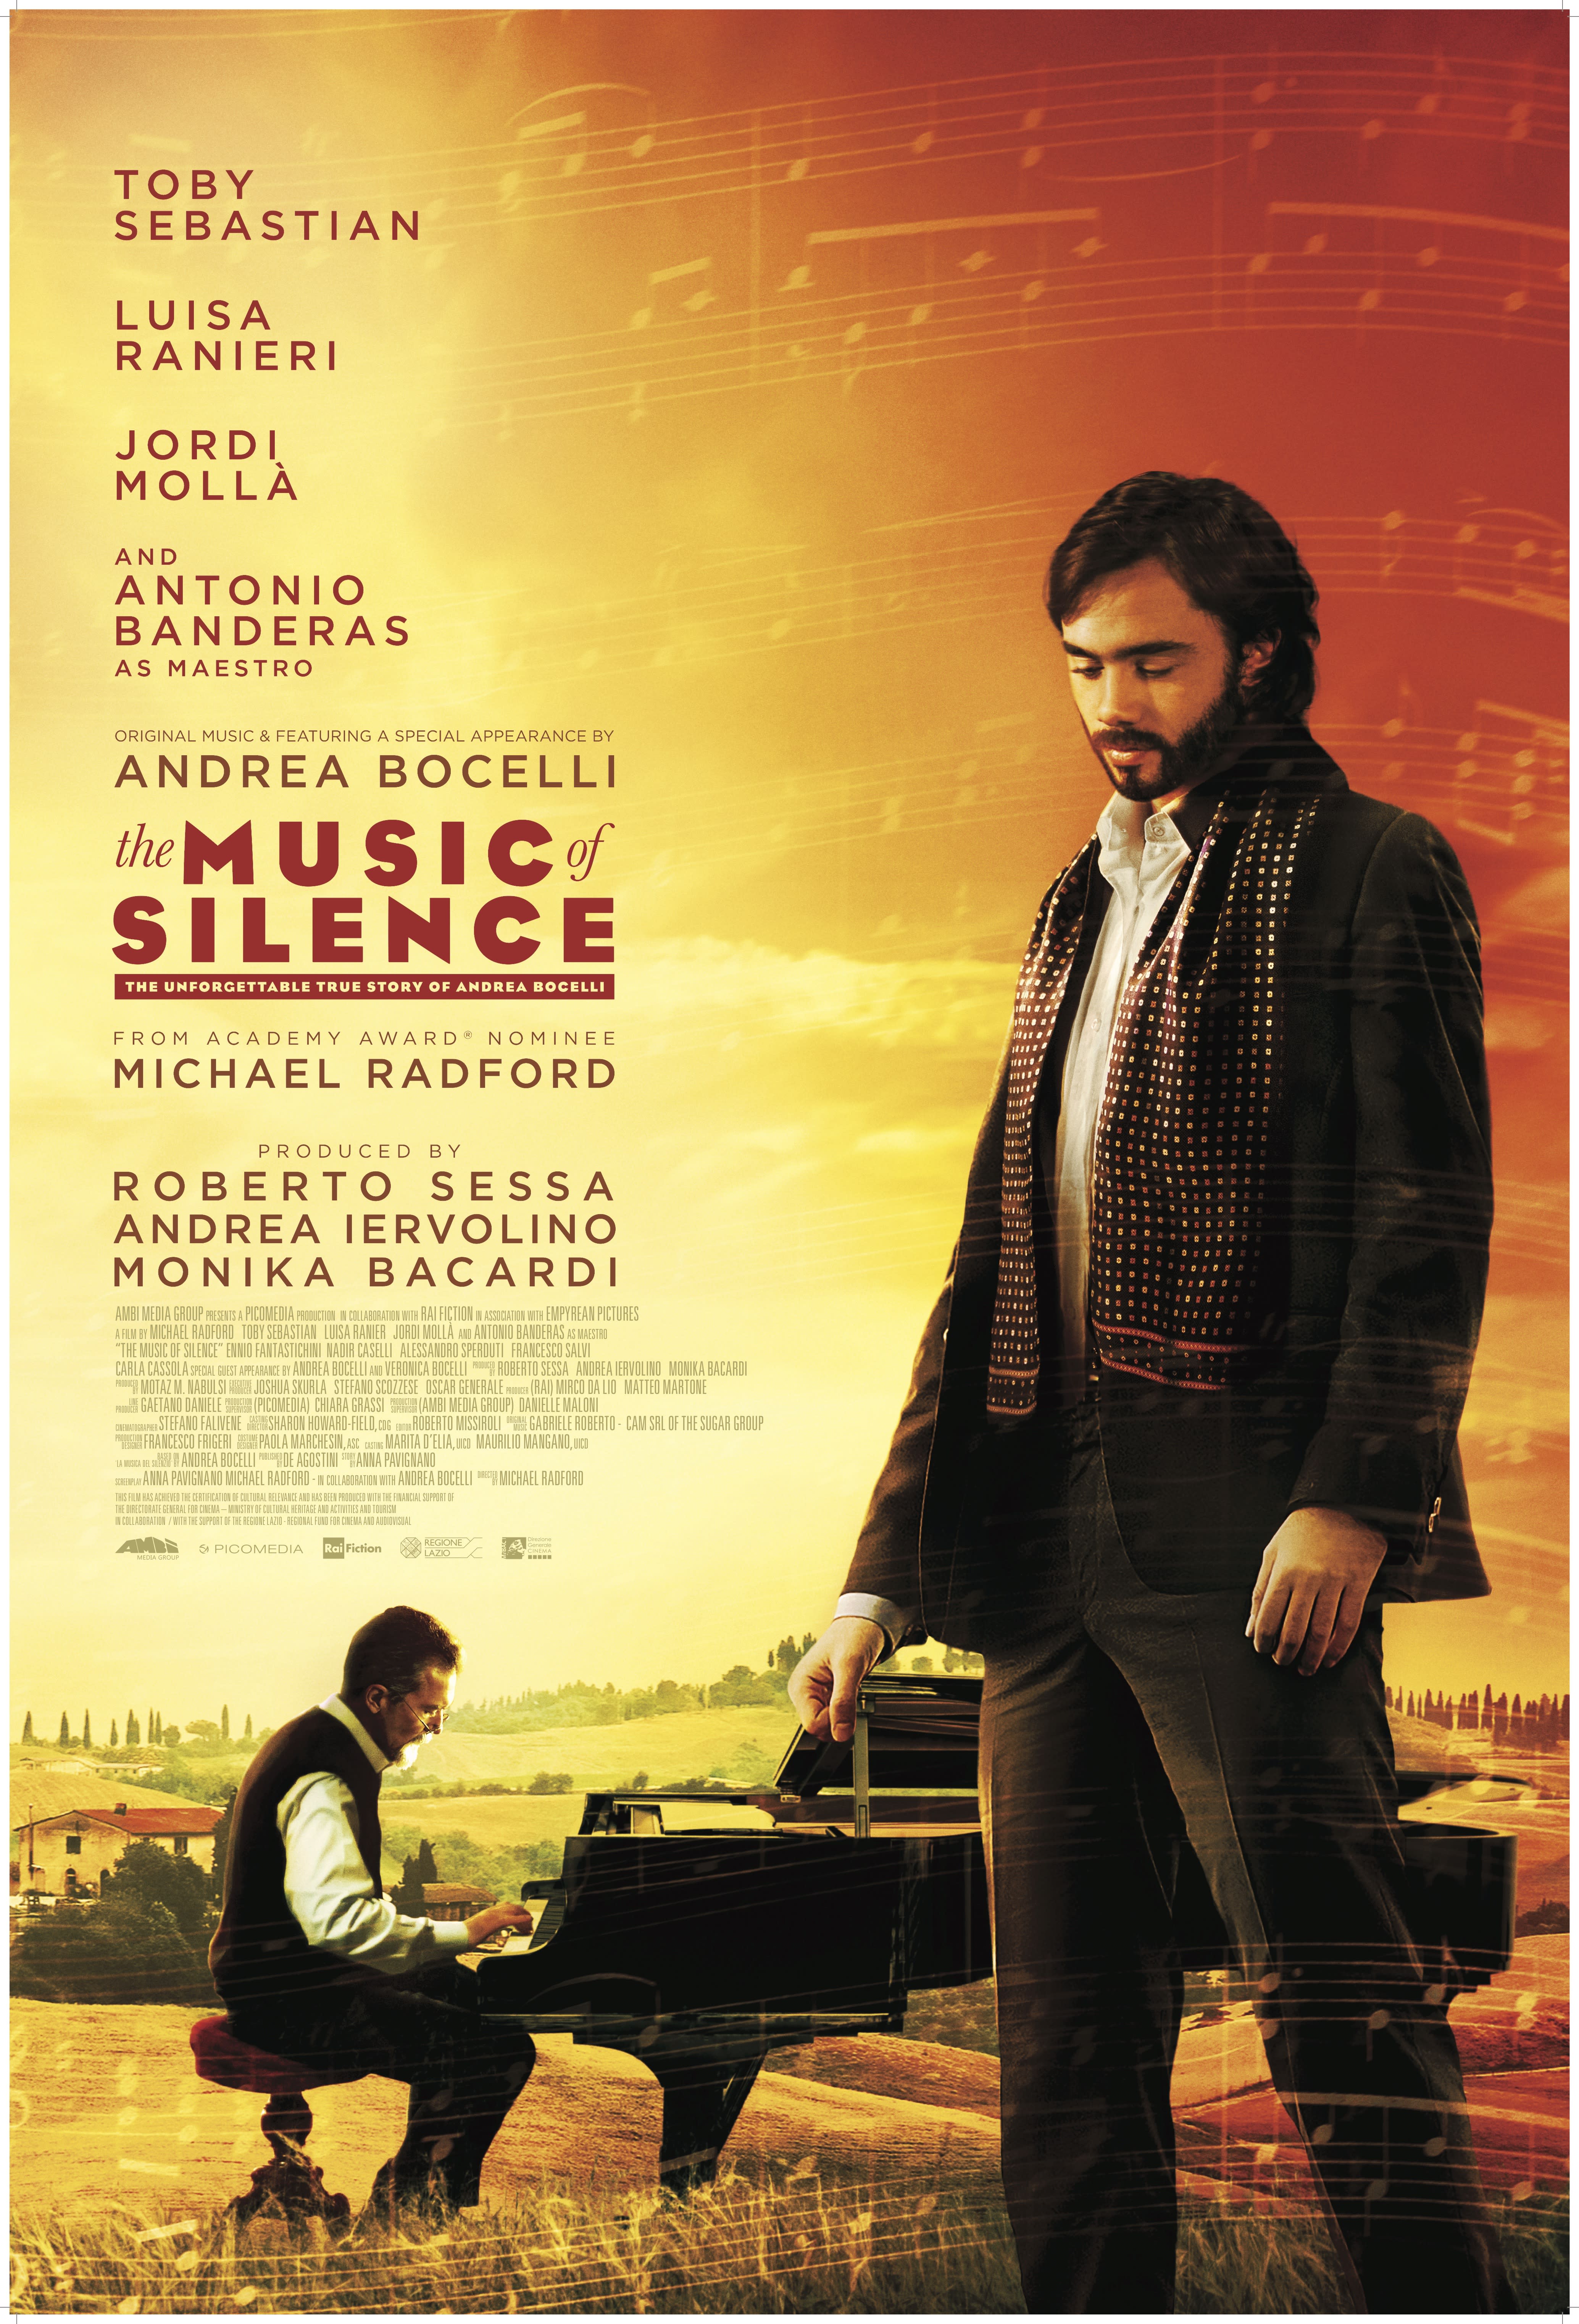 Video premiere See a trailer of Andrea Bocelli biopic, 'The Music of